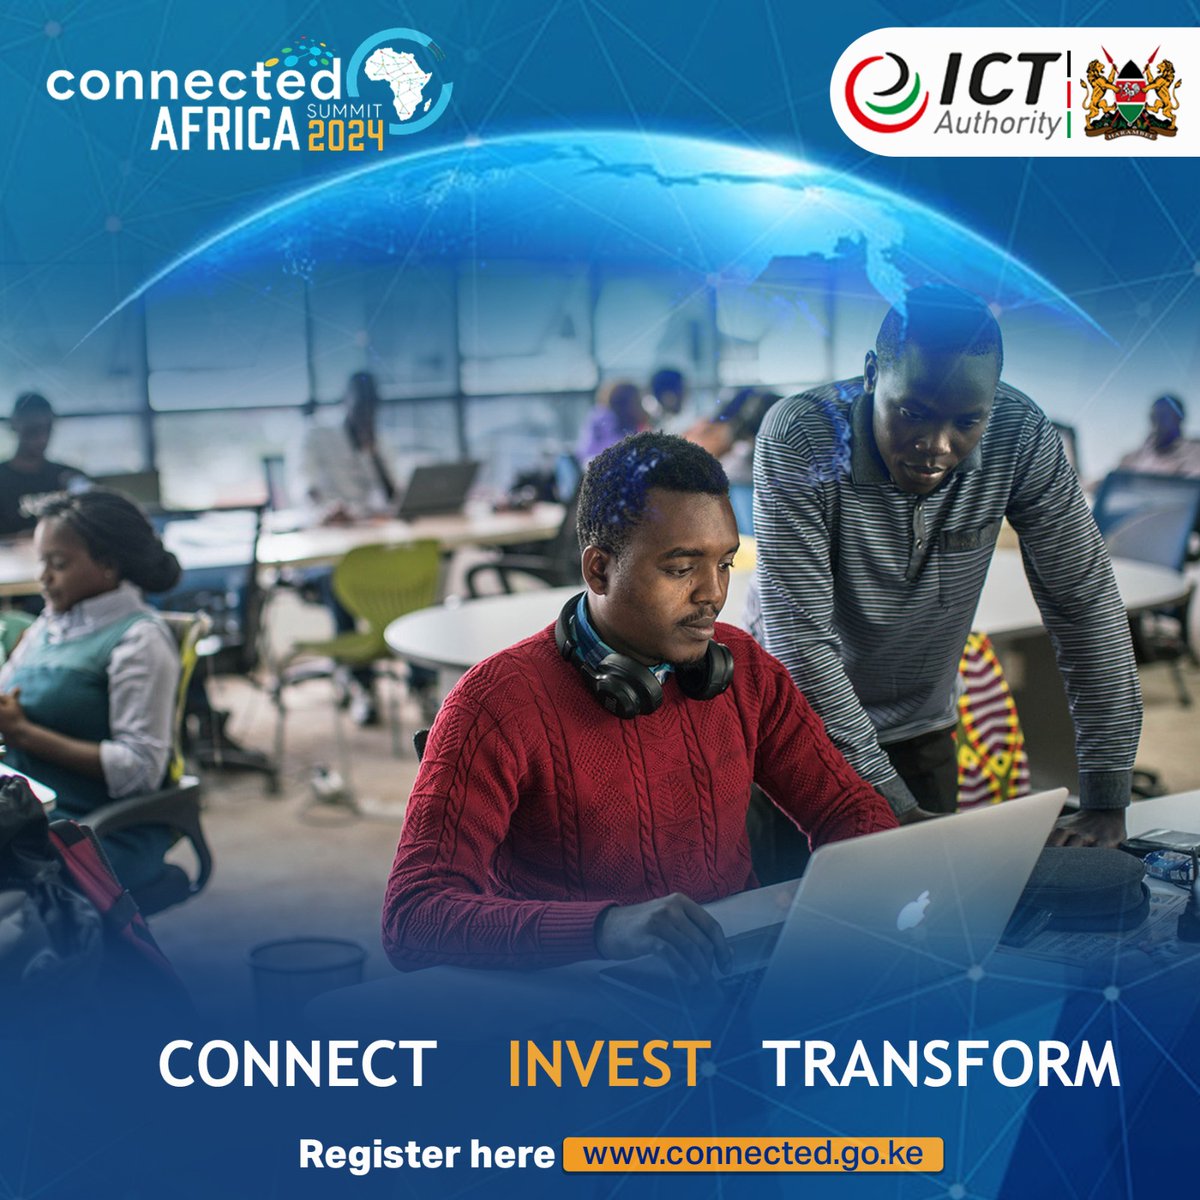 Immerse yourself in Nairobi's culture of digital economy. Learn from local success stories, visit innovation hubs, and lets compare what Africa has on its digital transformation journey. Connect today at connected.go.ke #ConnectedAfricaSummit2024 @ICTAuthorityKE